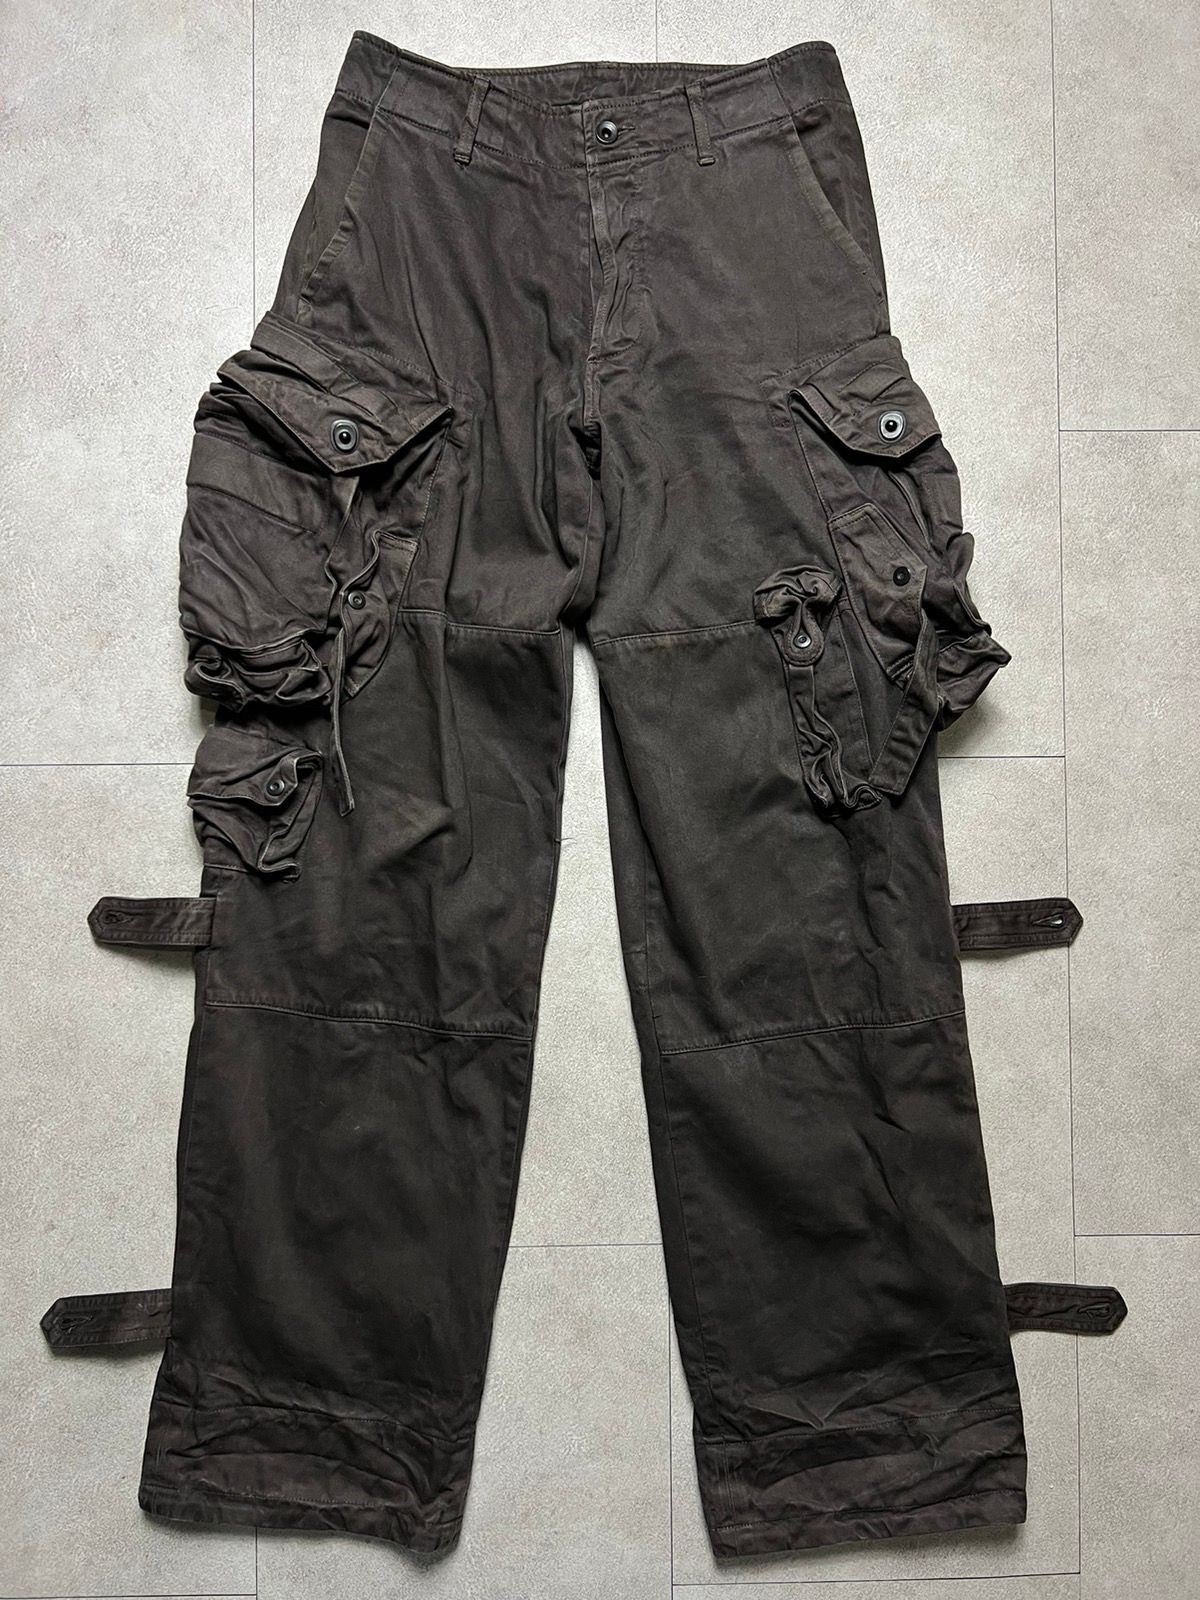 Pre-owned Julius Shifting Heavy Gas Mask Cargo Pants Trousers 09 In Khaki